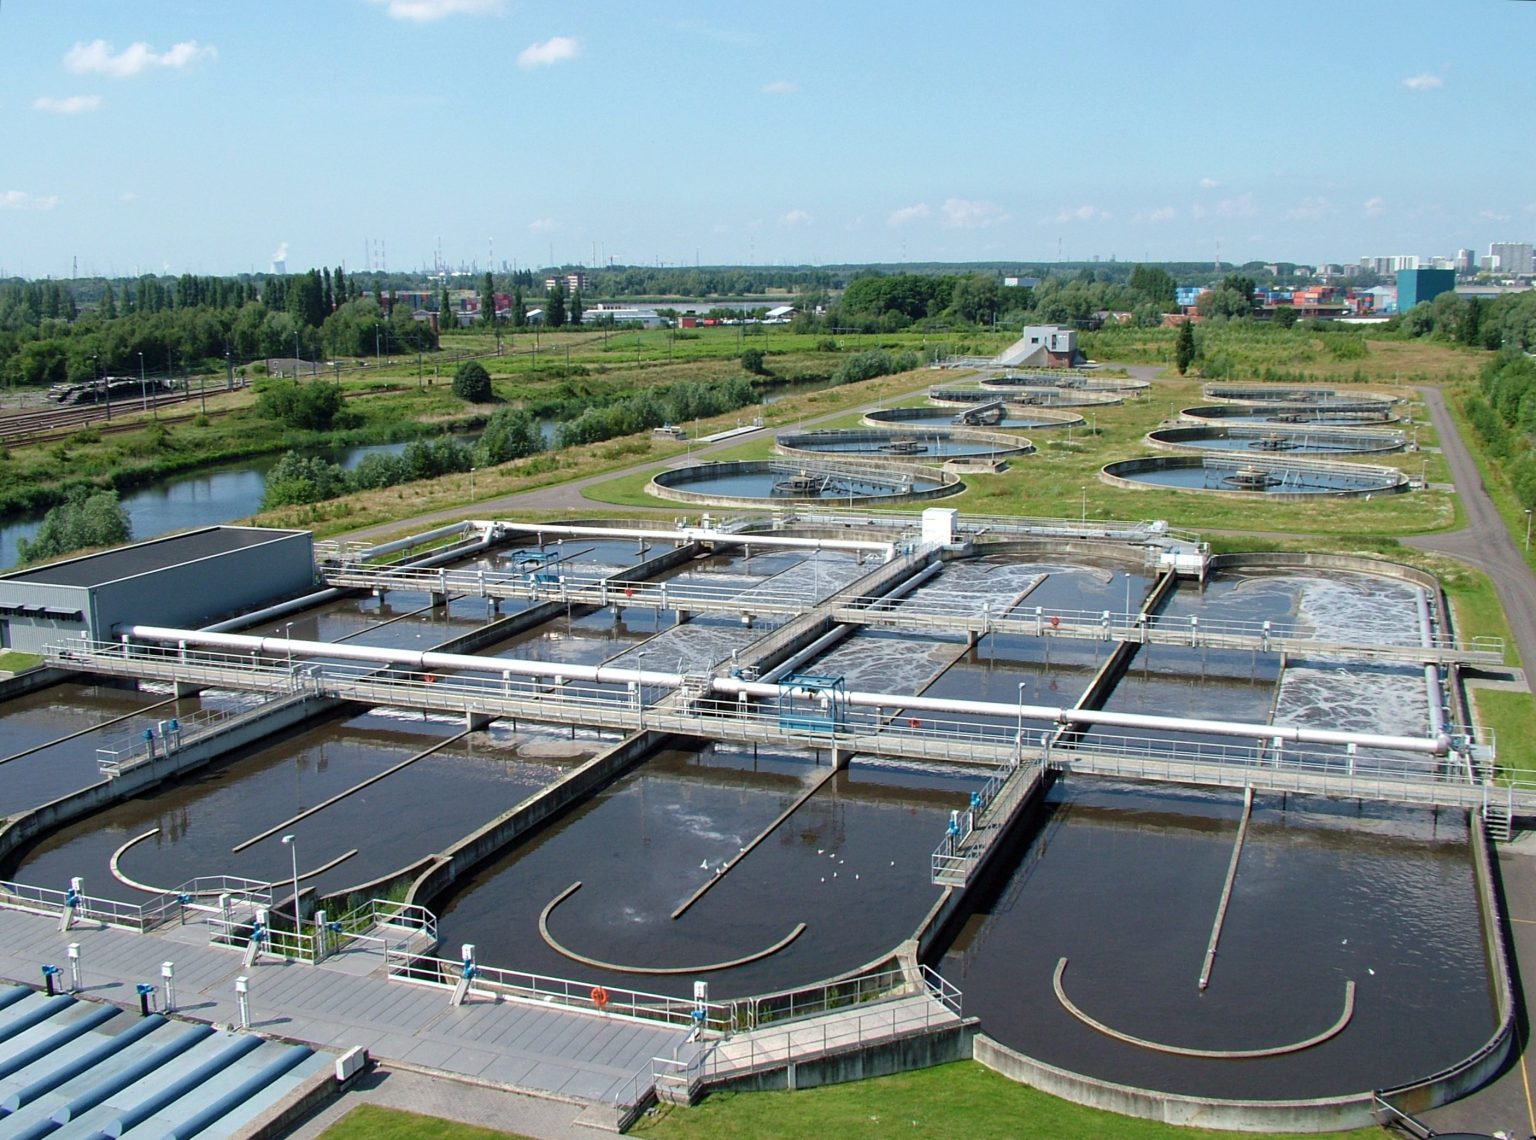 Brussels proposes guidelines for wastewater reuse for irrigation